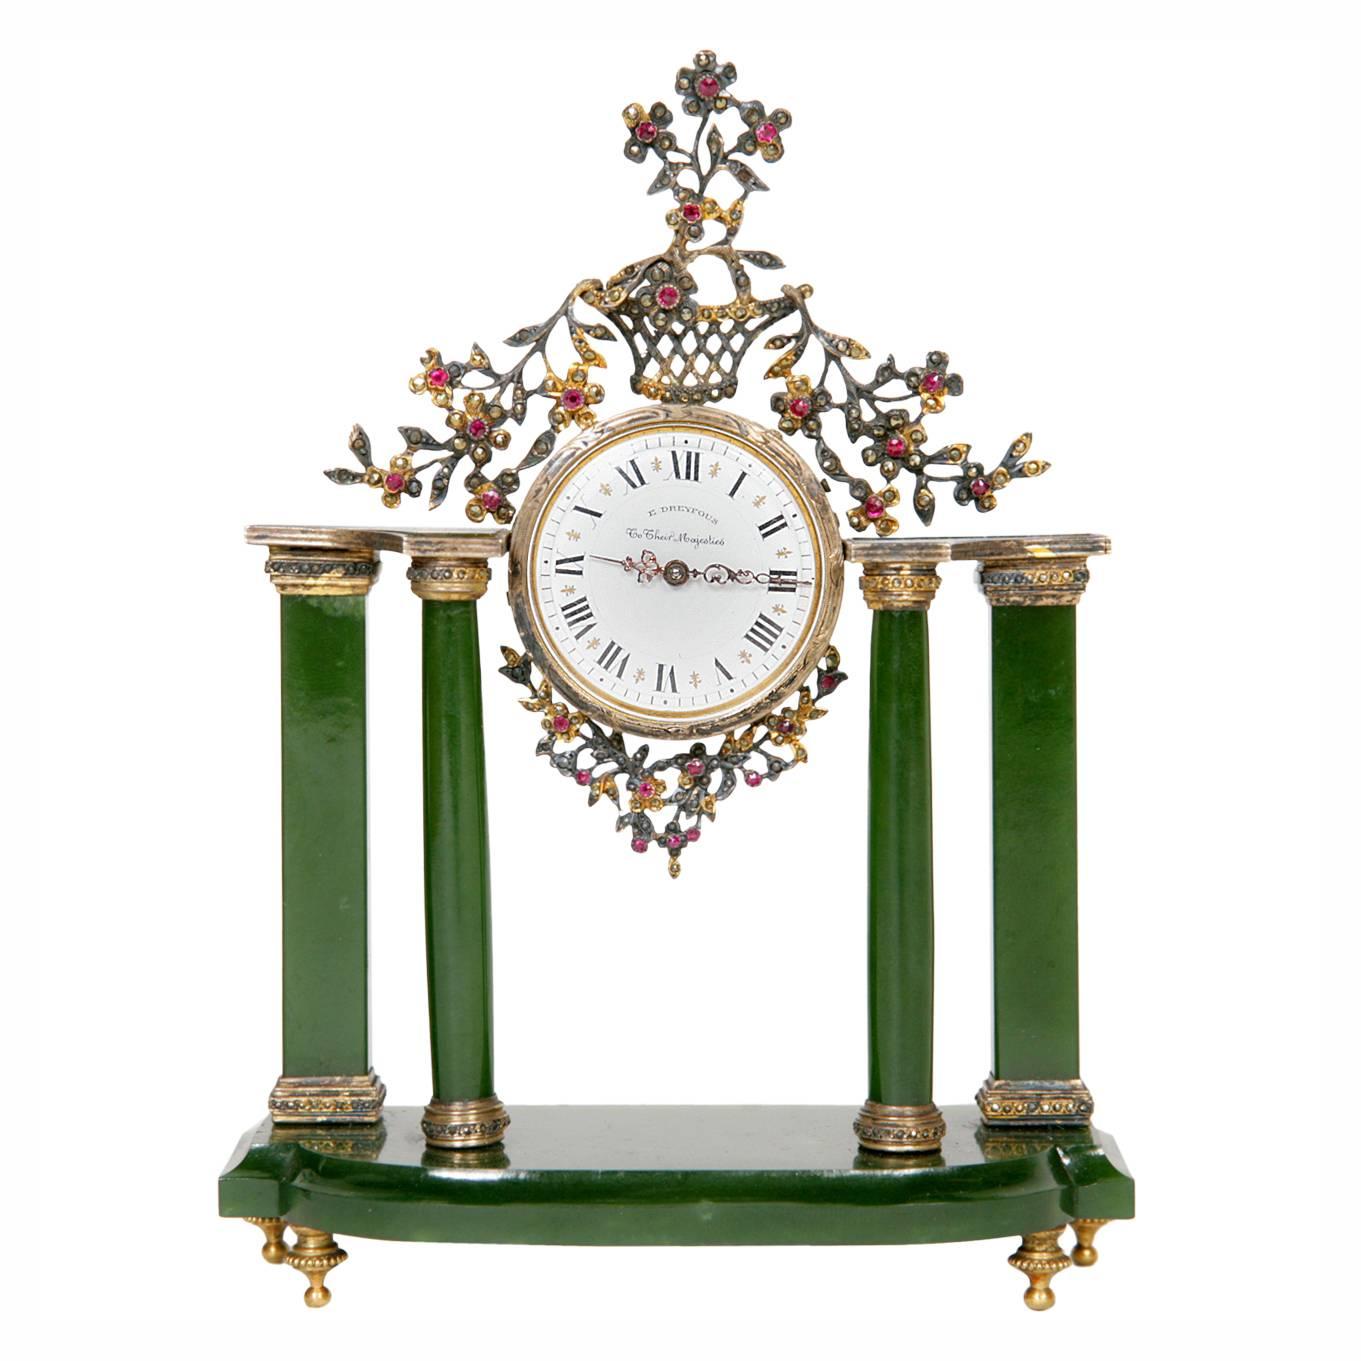 19th Century Table Clock with Silver, Nephrite and Precious Stones